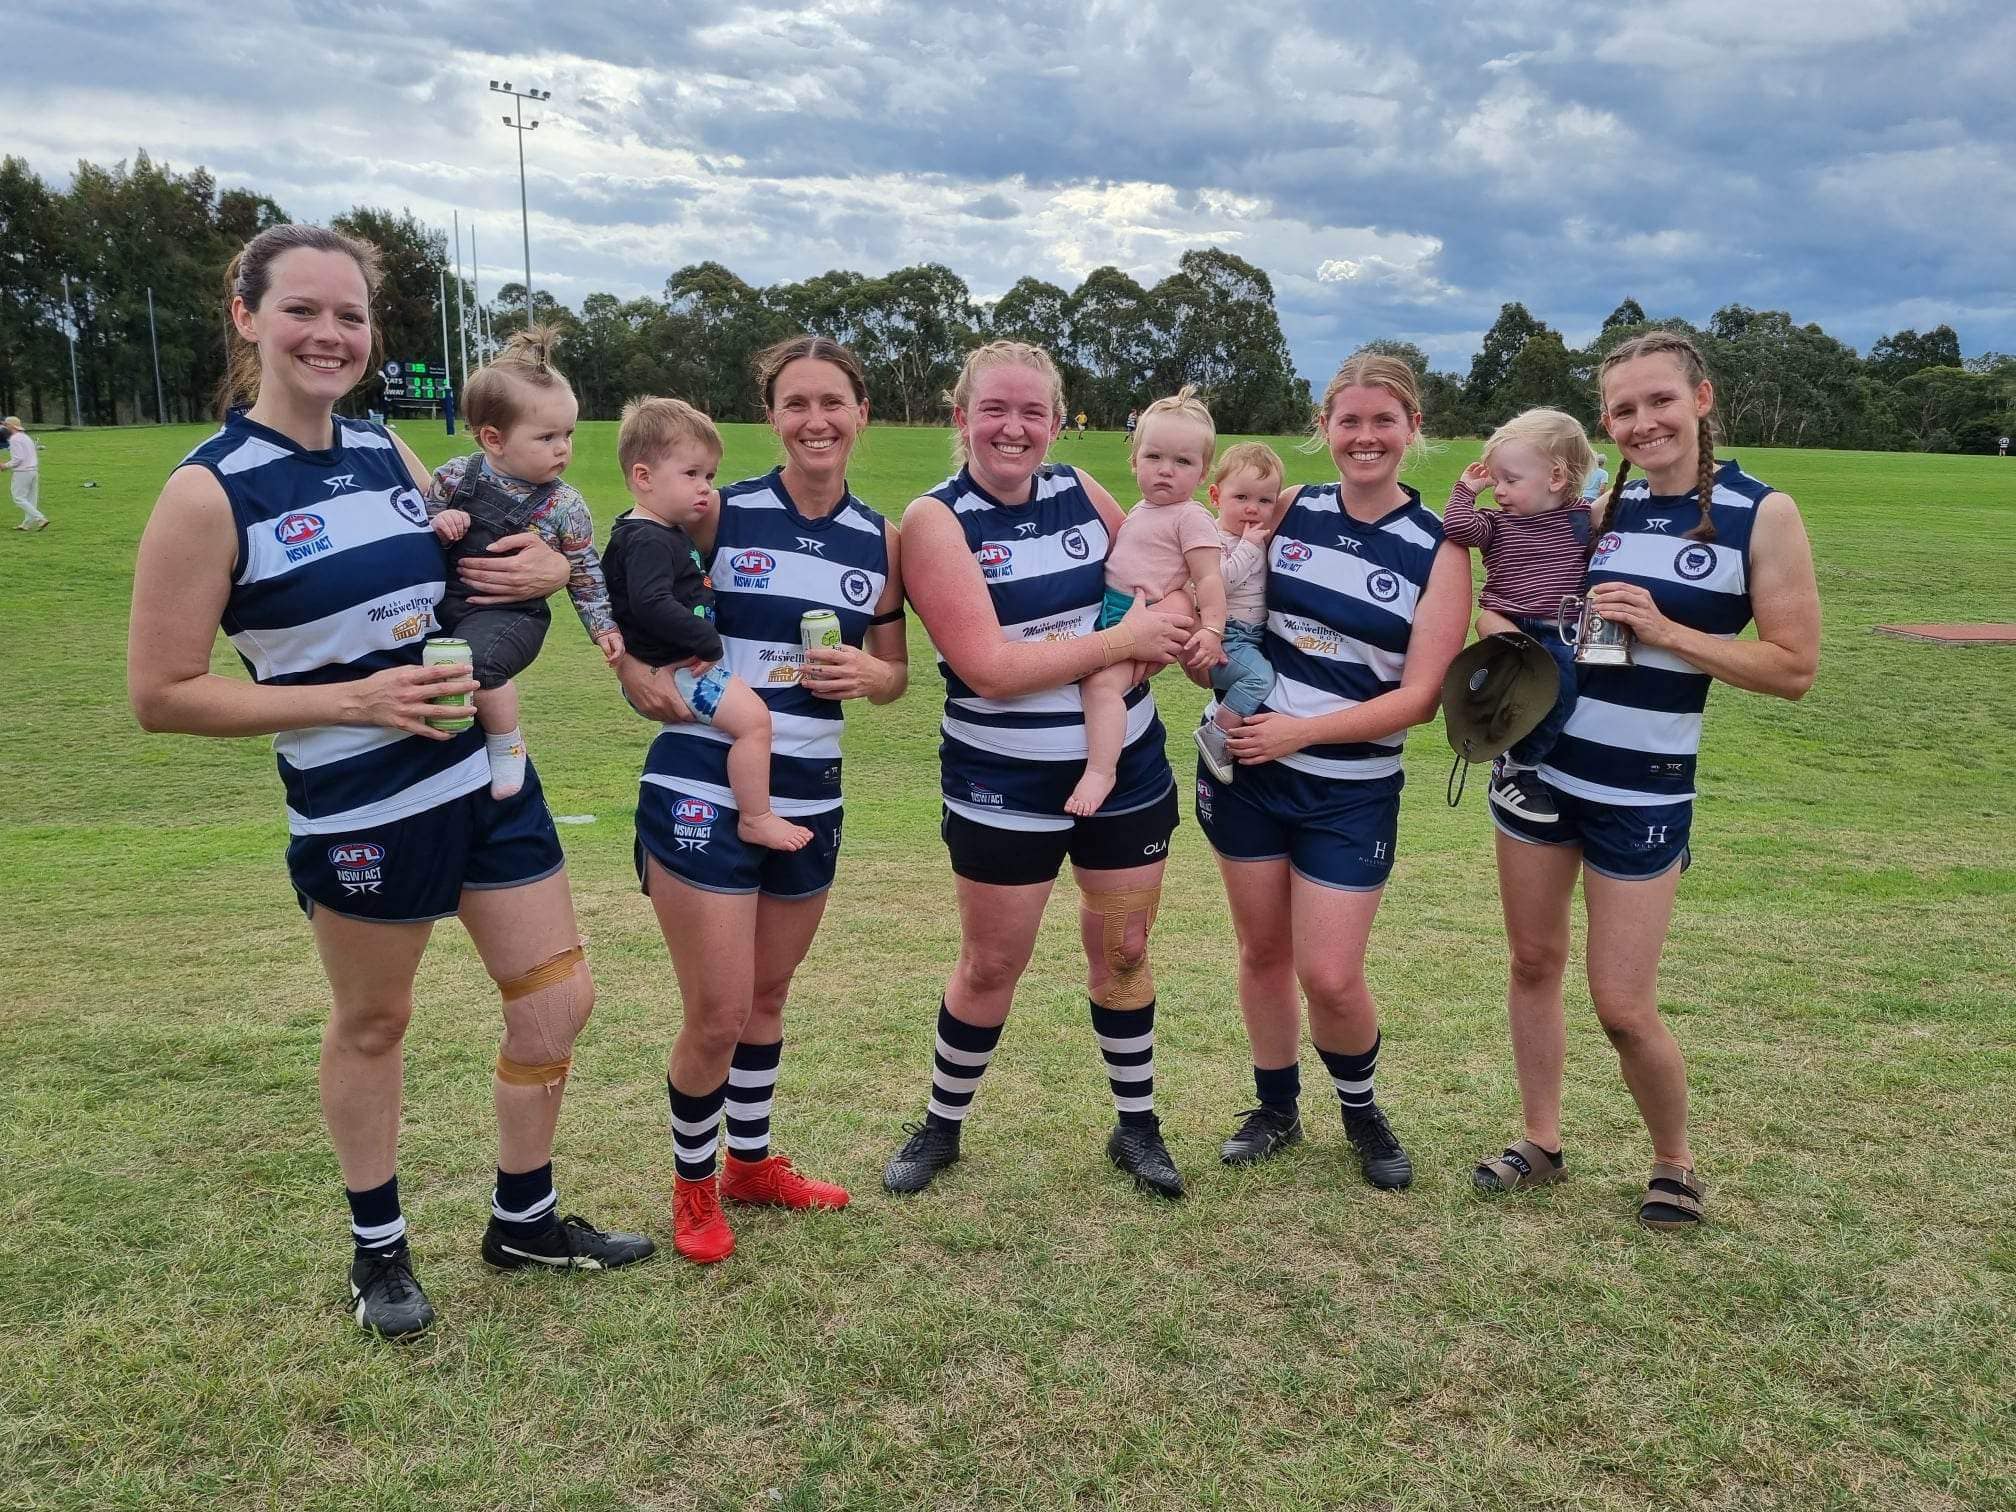 Muswellbrook vying for Mother’s Day win